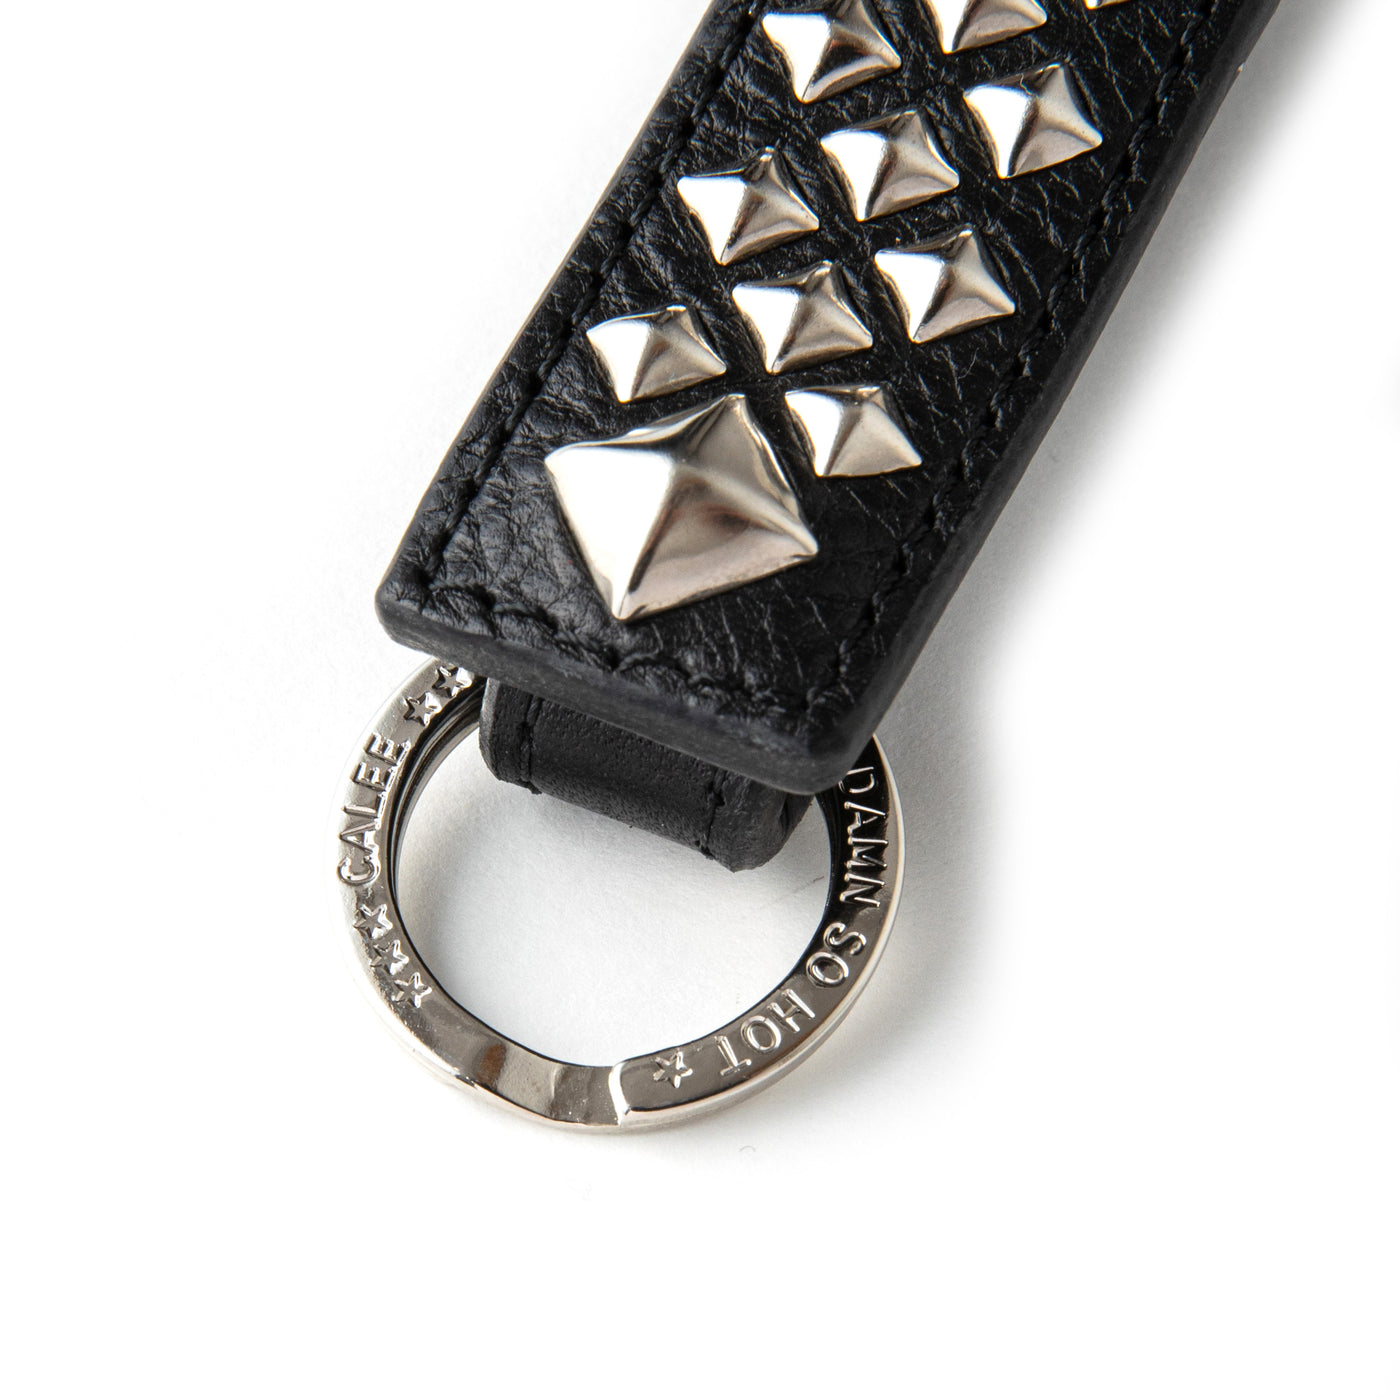 STUDS LEATHER SNAP KEY RING